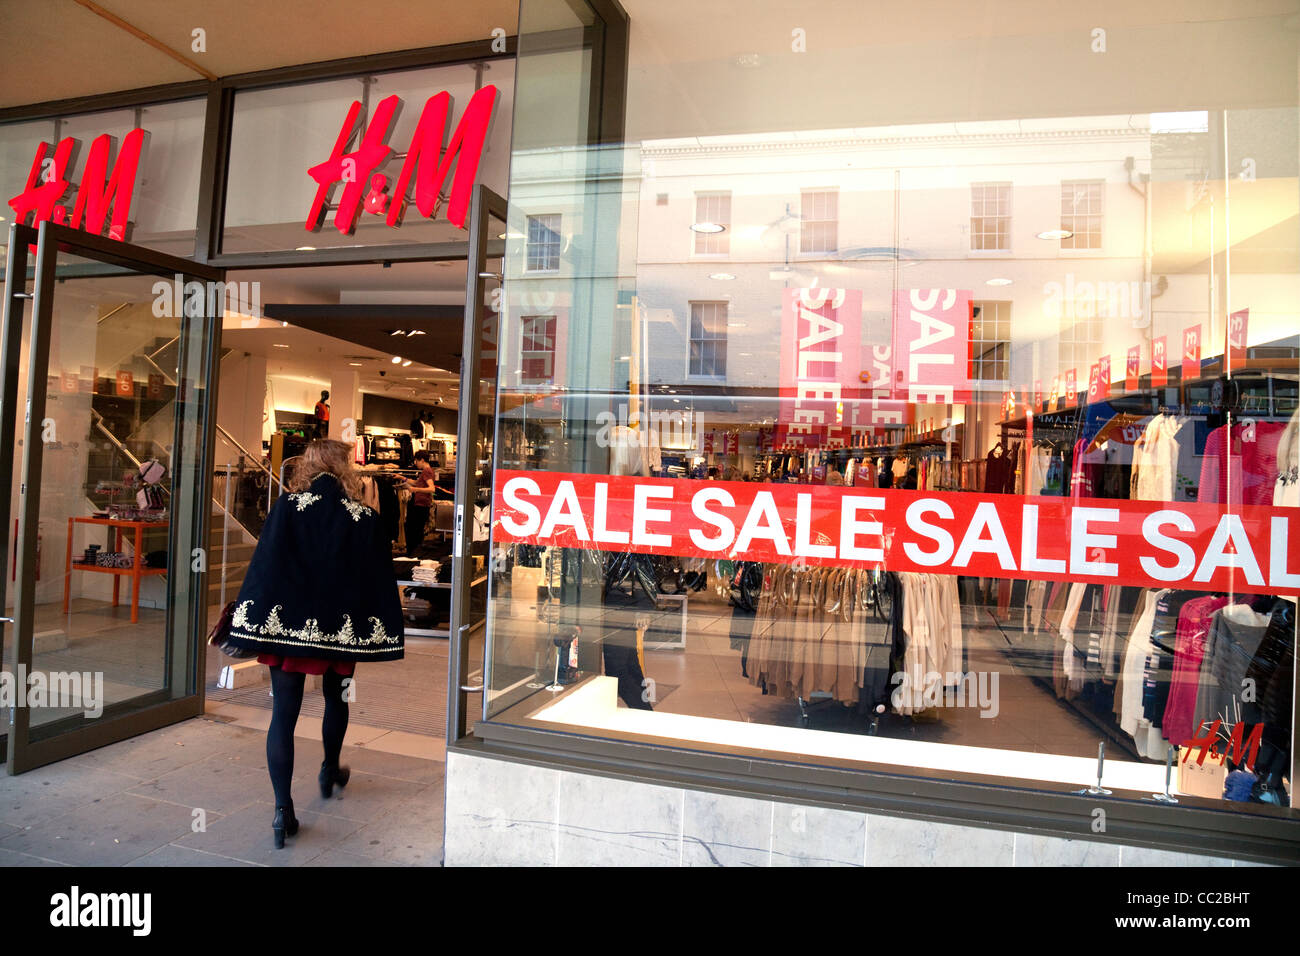 H&M store UK; A shopper entering the H&M store during the Sales Stock Photo  - Alamy